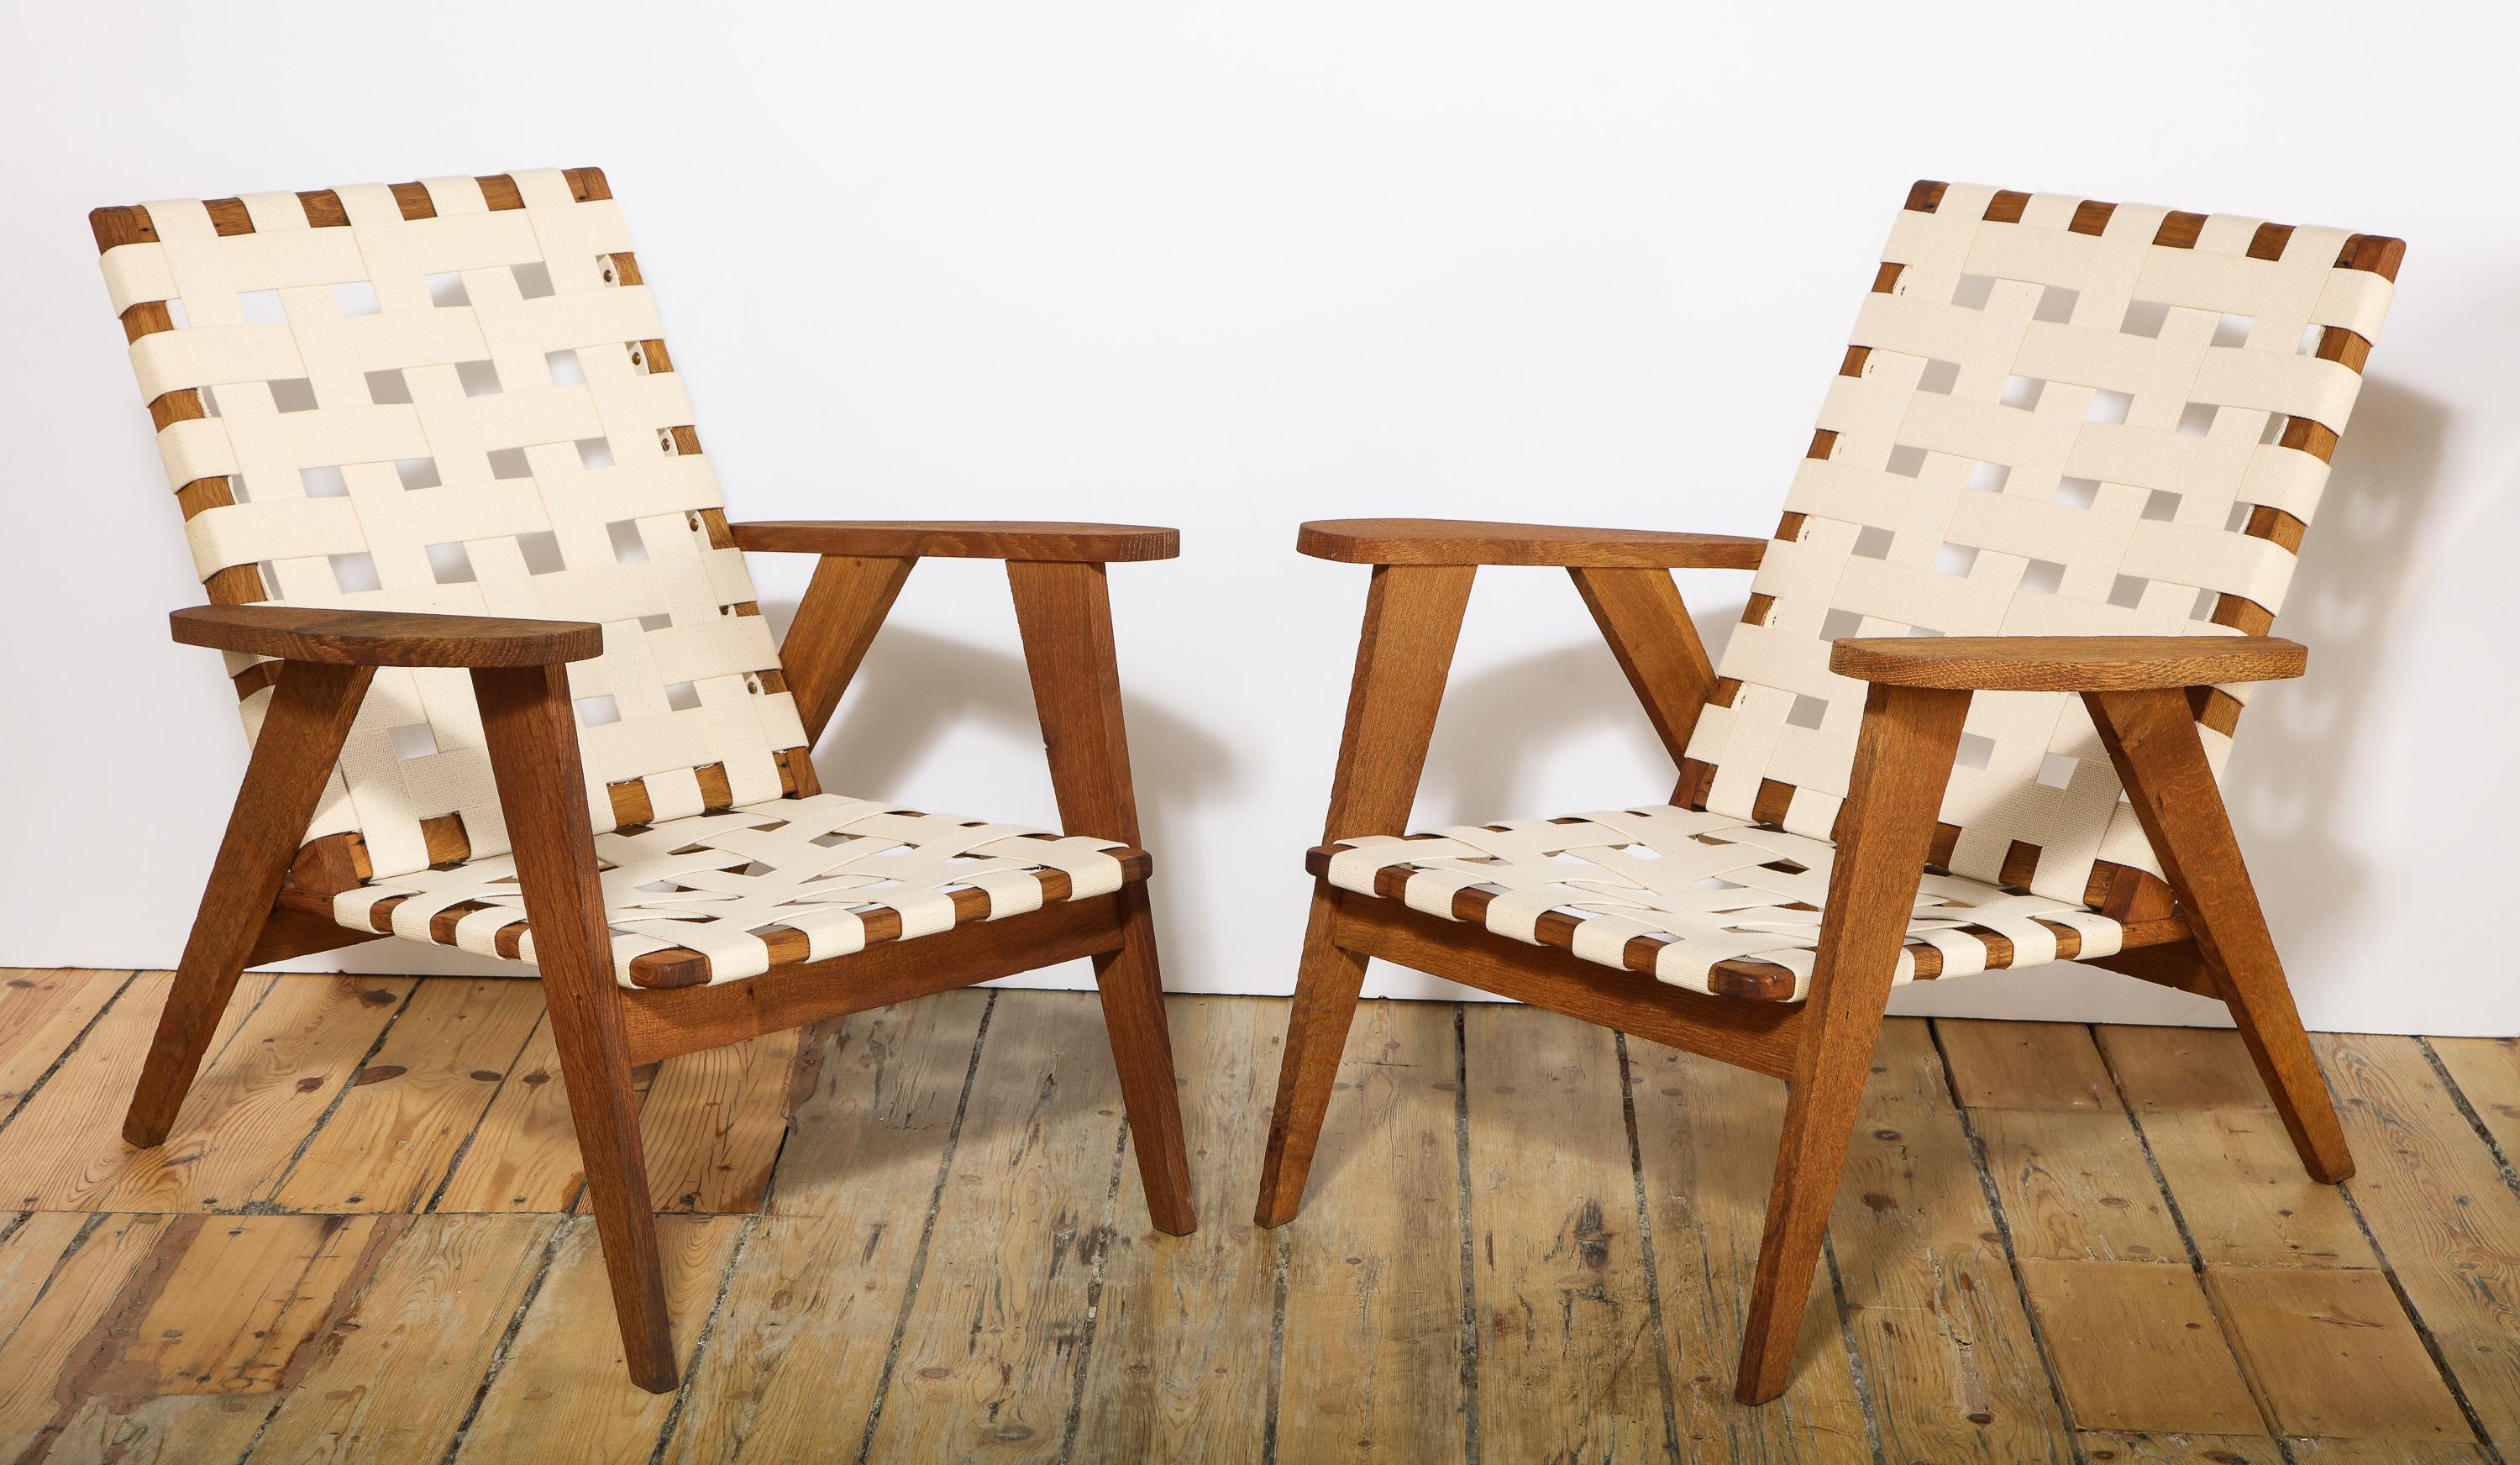 Pair of French Reconstruction armchairs in oak and cotton straps.
2 pairs available.
Measures: 30 x 31 x 27.